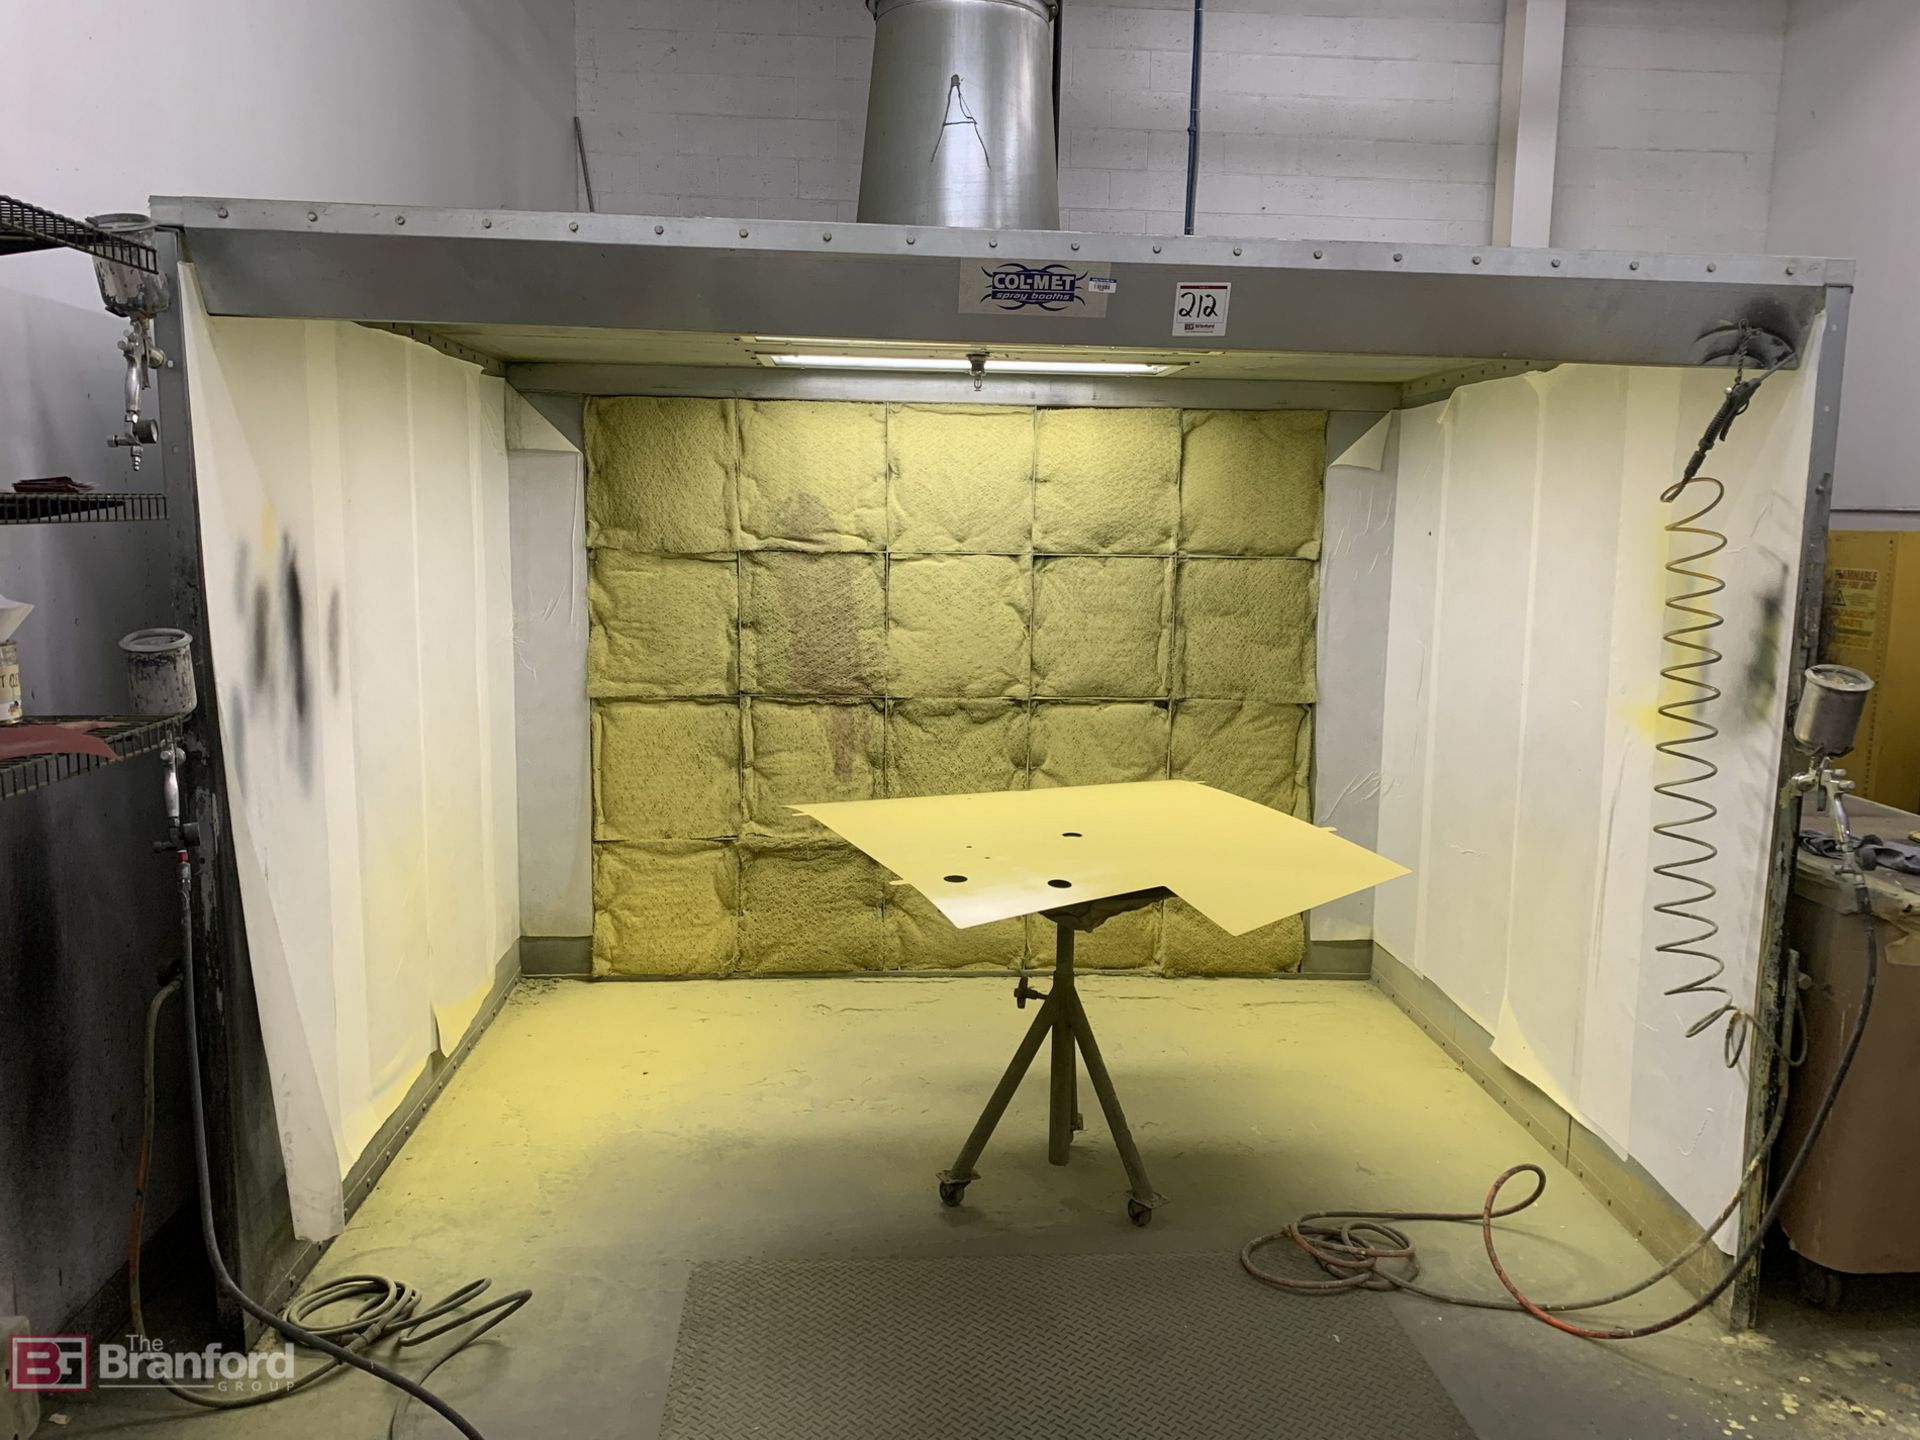 Col-Met Paint Spray Booth 10’ x 10’ x 8‘